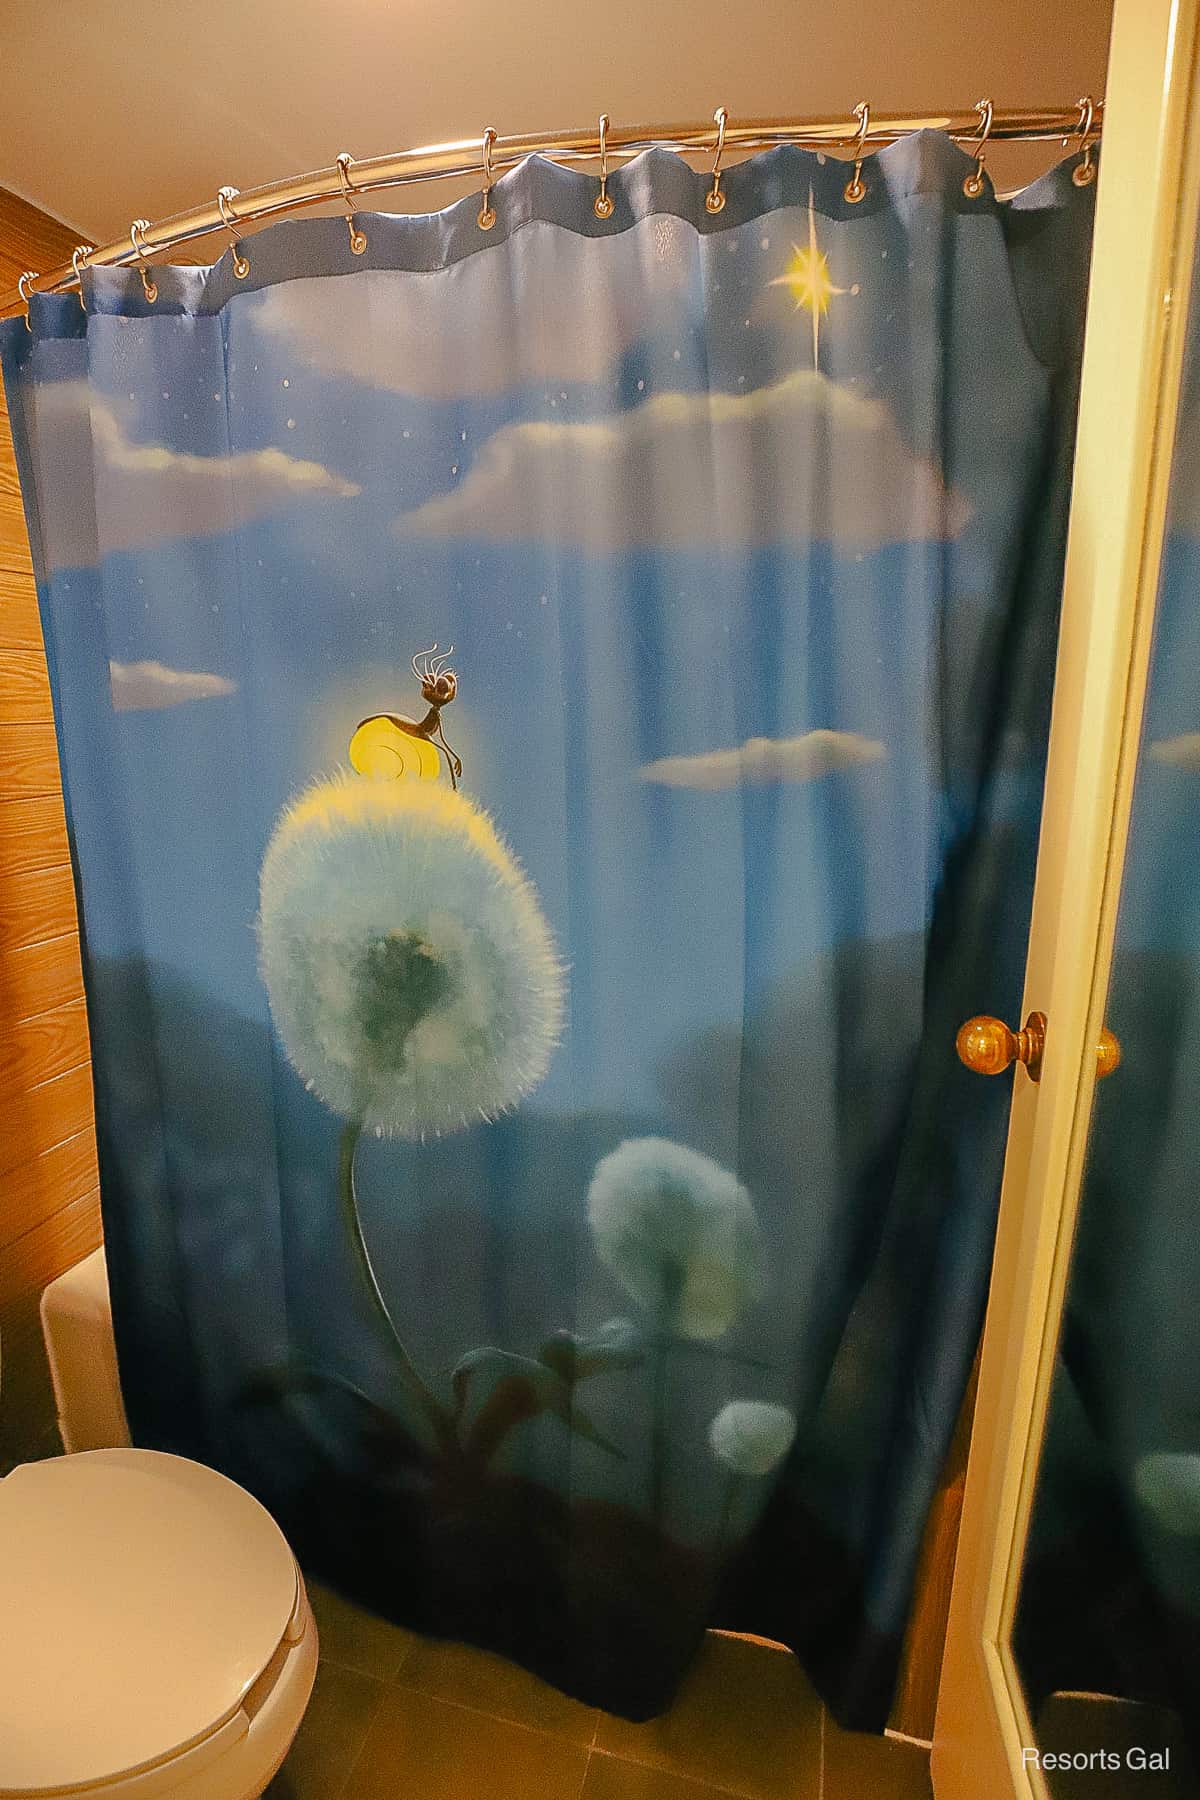 Shower curtain with Ray and Evangeline from The Princess and the Frog 